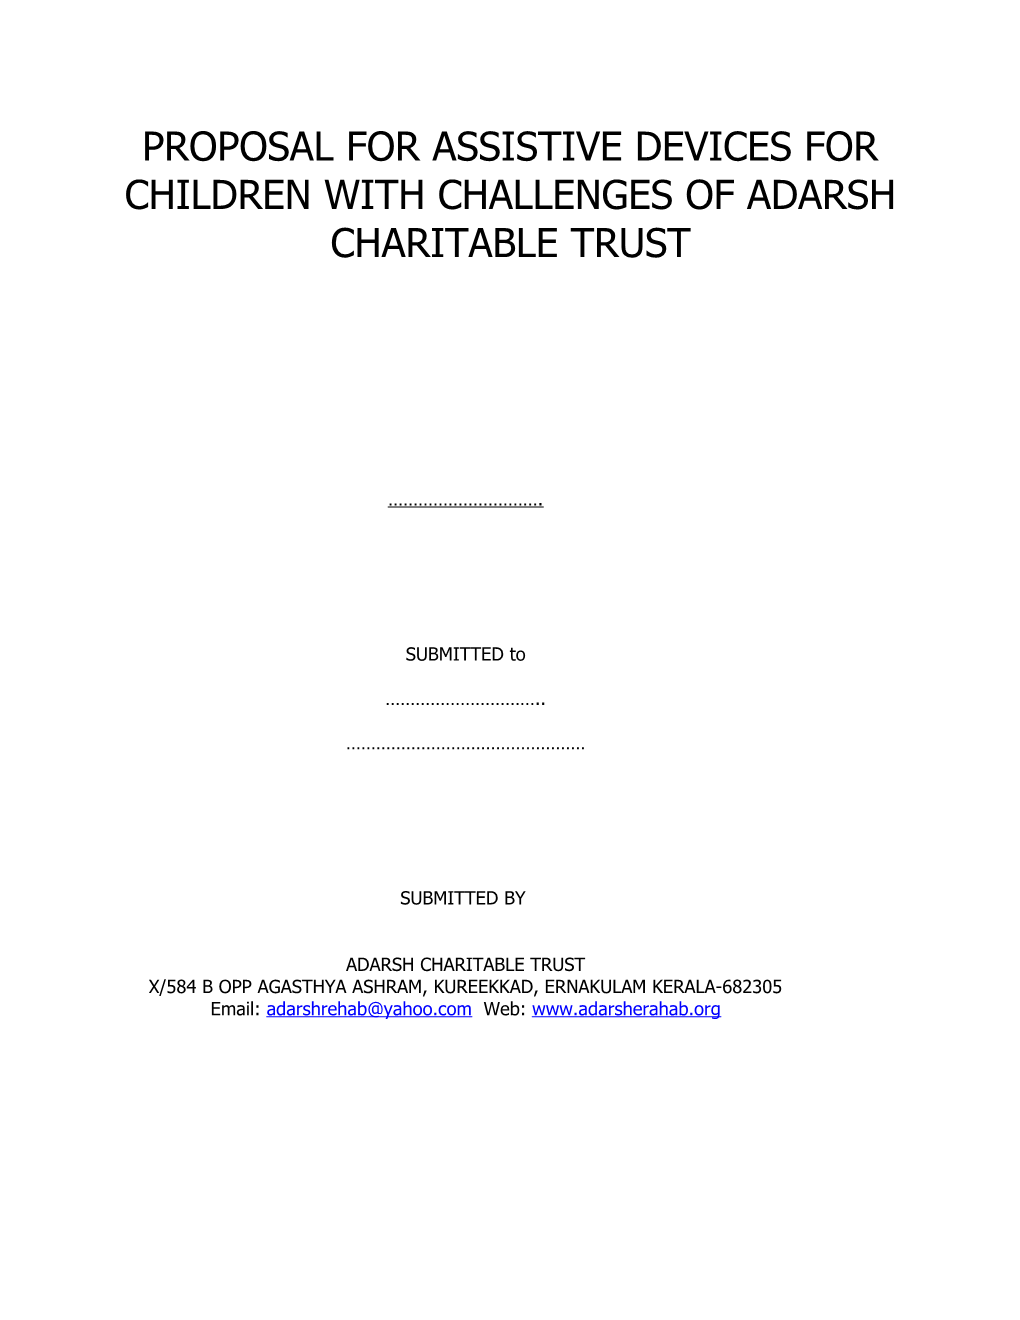 Proposal for Assistive Devices for Children with Challenges of Adarsh Charitable Trust